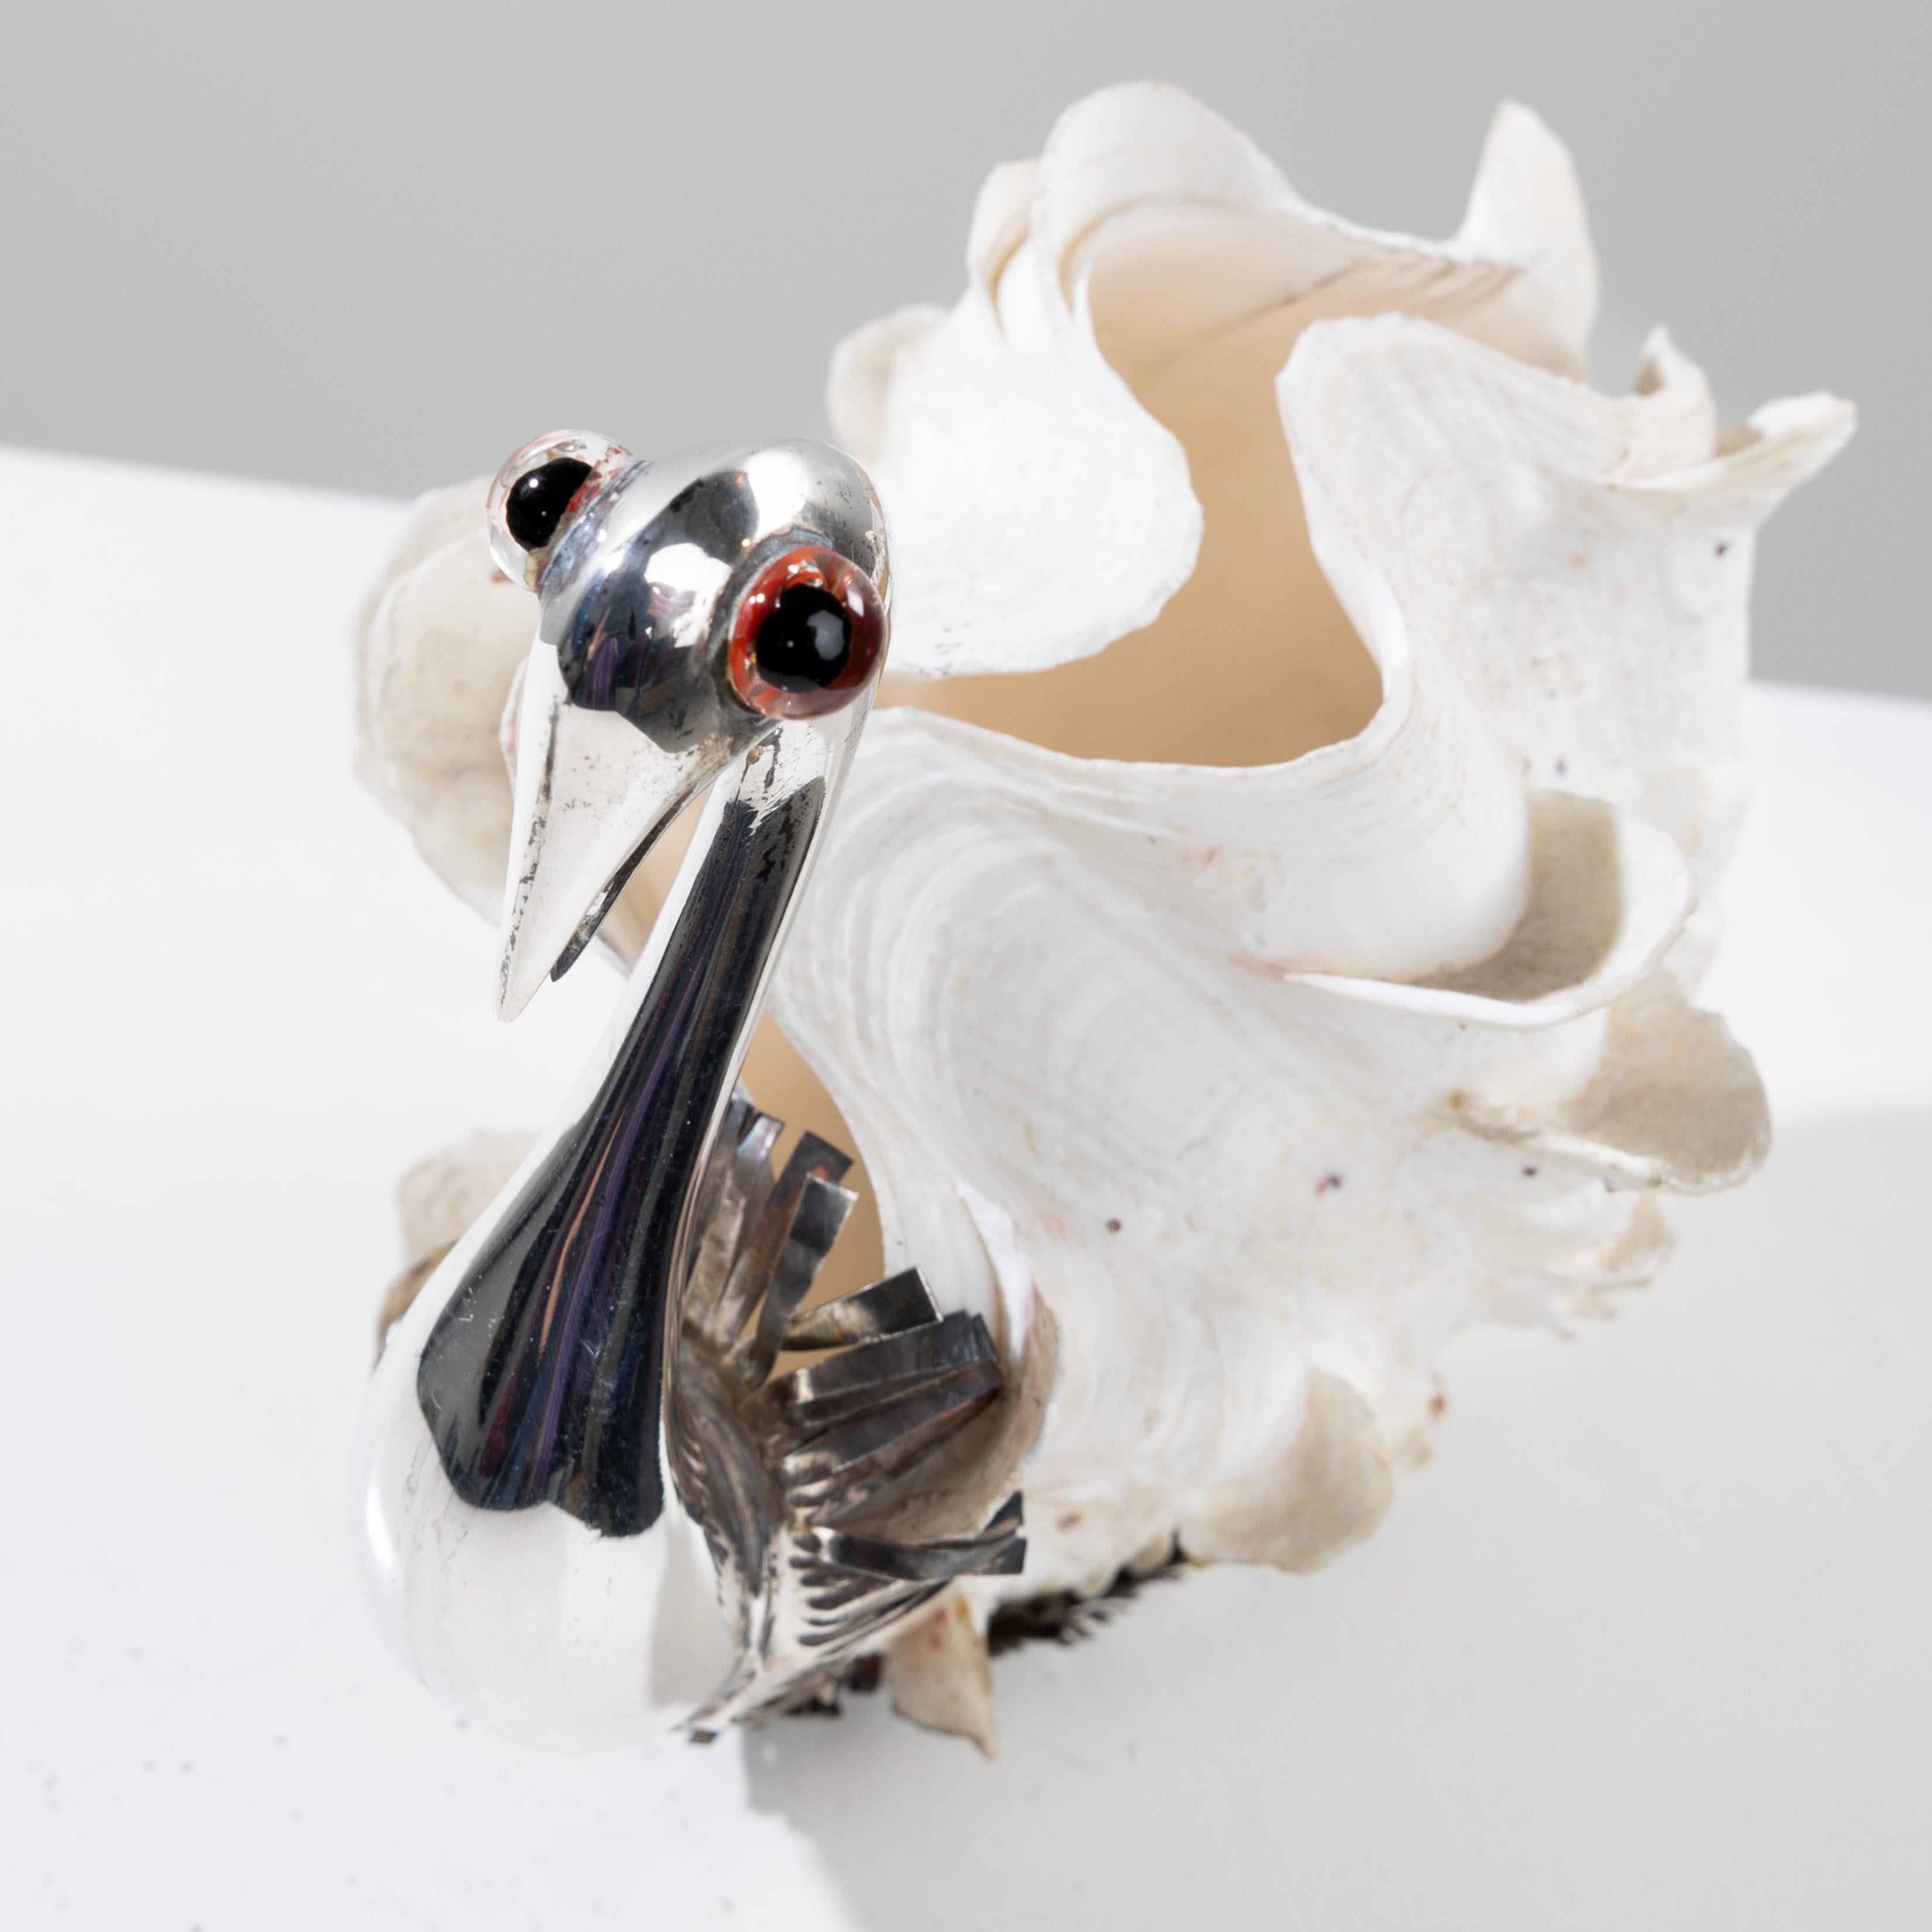 Swan by Gabriele De Vecchi – Silver sculpture mounted on a shell For Sale 1